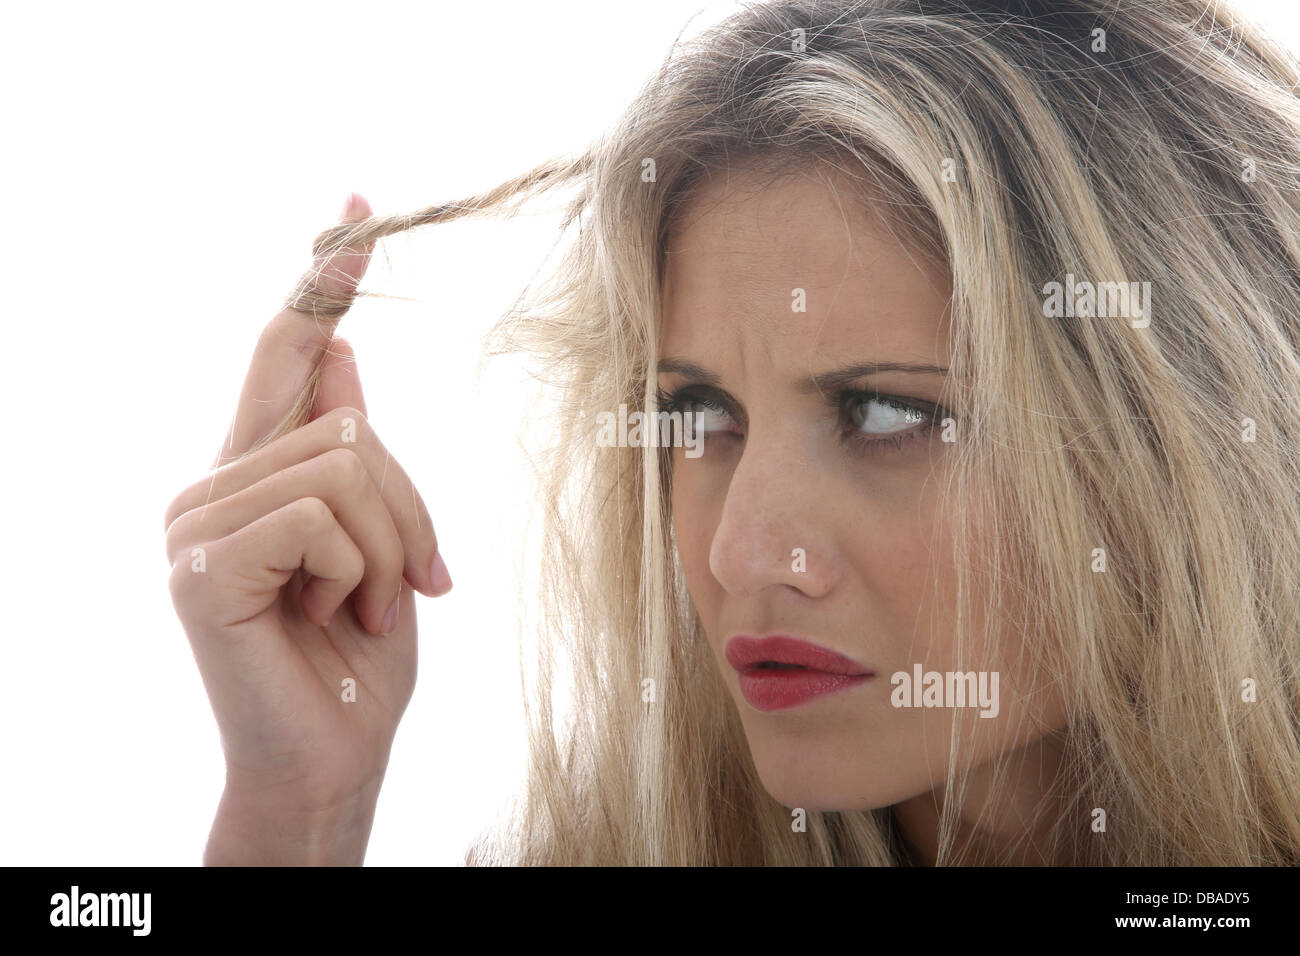 Model Released. Young Woman Bad Hair Day Stock Photo